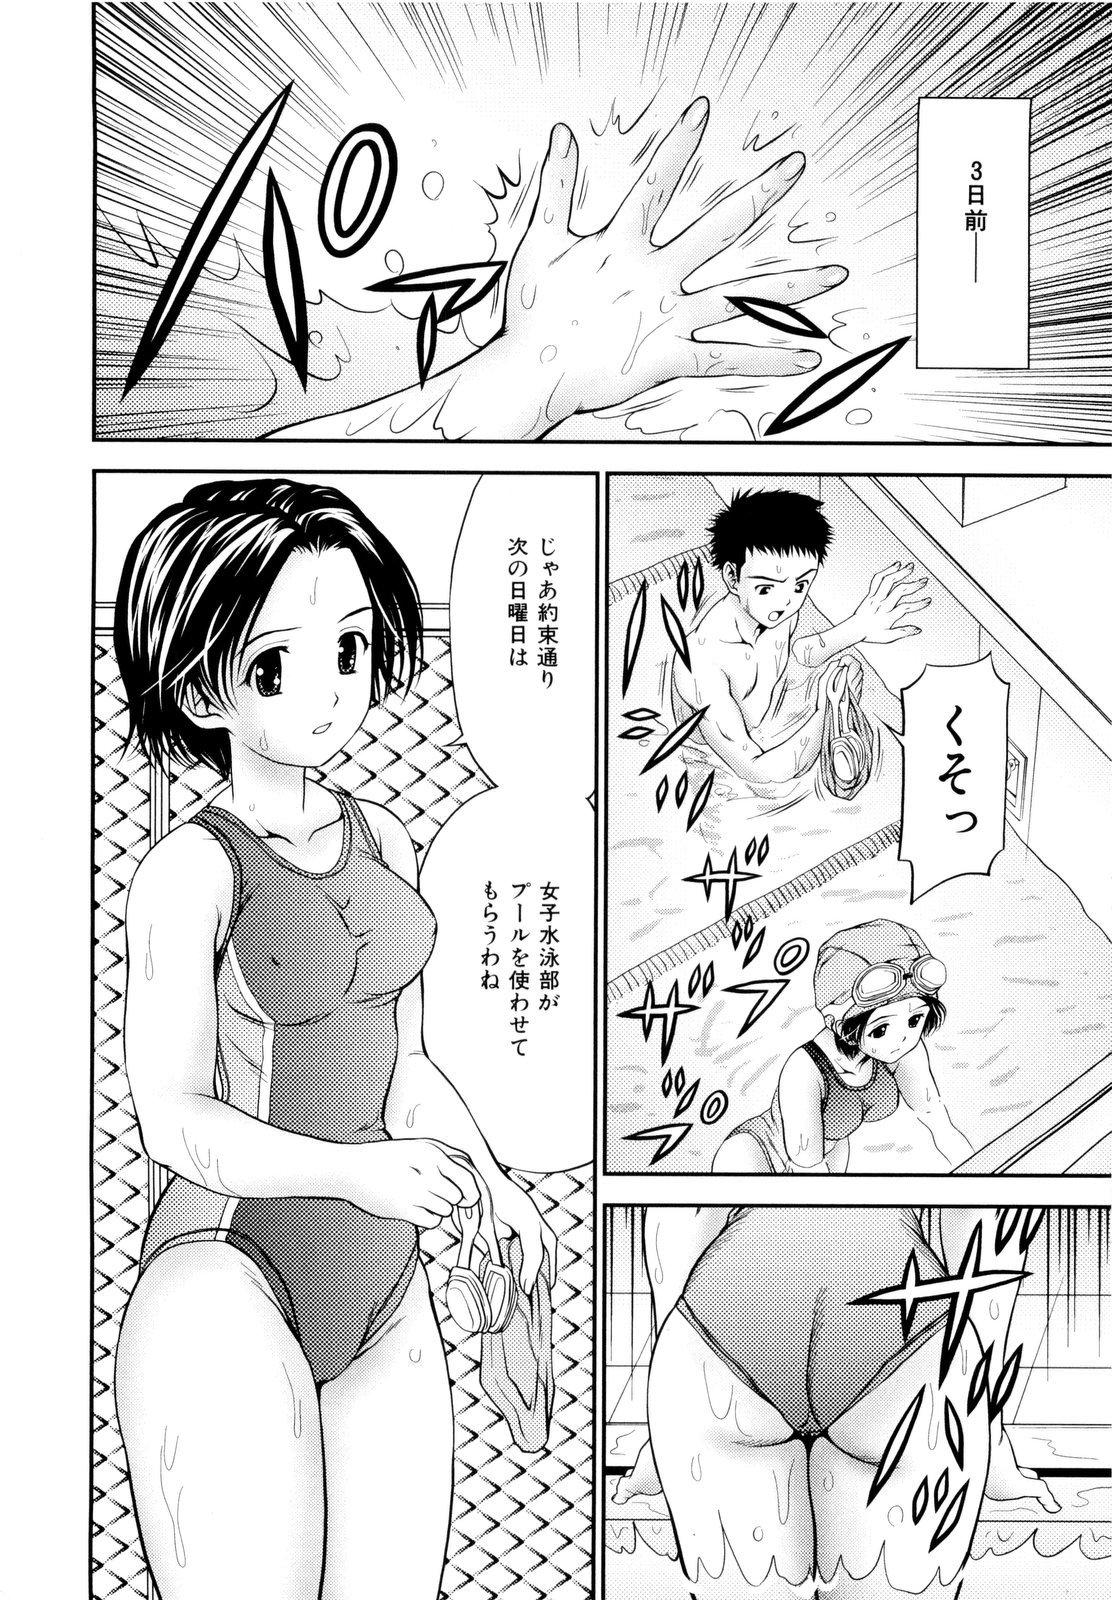 Analsex Imouto Bloomer Weird - Page 11